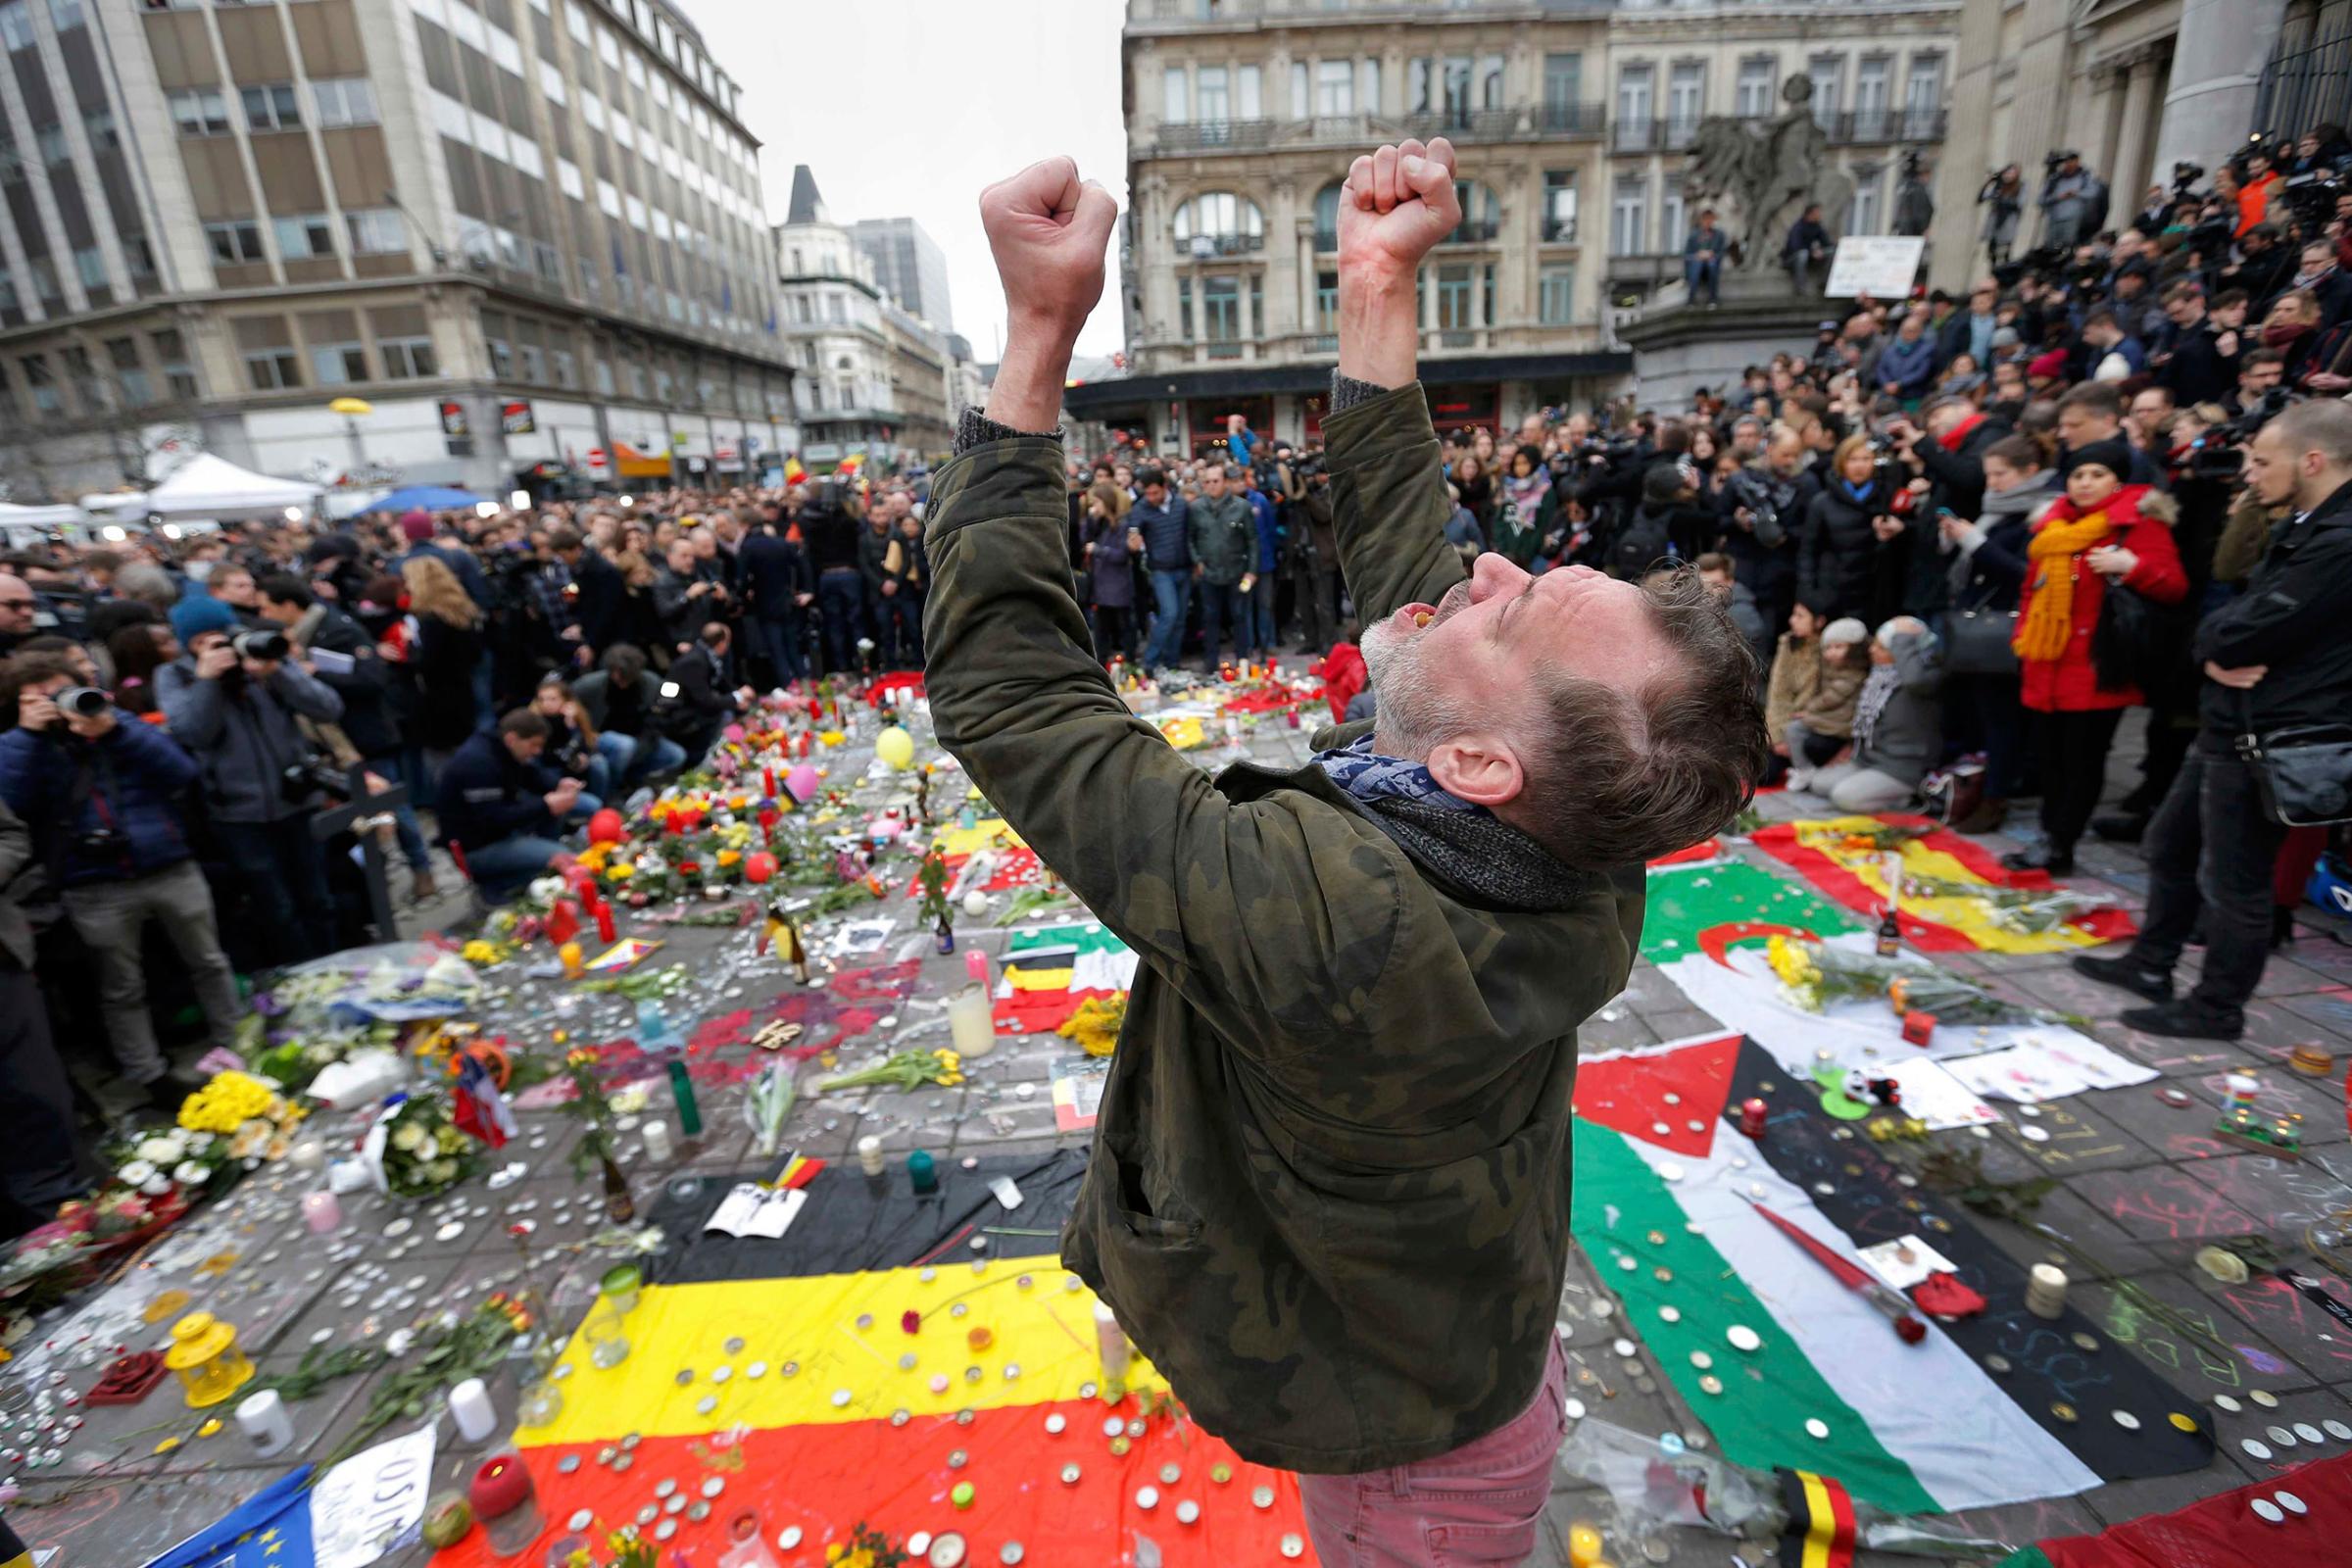 A man reacts at a street memorial following Tuesday's bomb attacks in Brussels, Belgium, March 23, 2016.